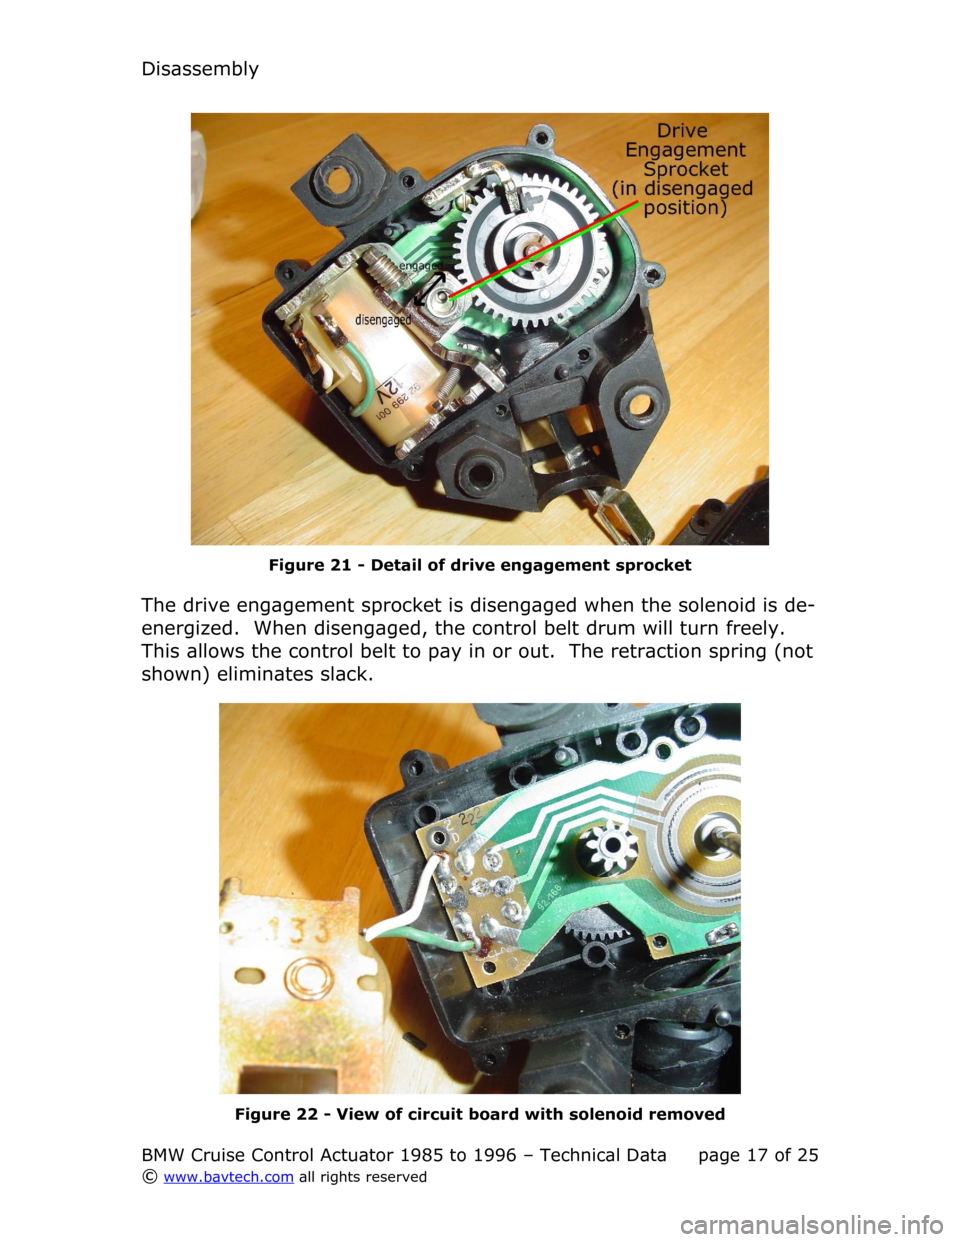 BMW 3 SERIES 1995 E36 Cruise Control Acutator Disassembly
Figure  21  - Detail of drive engagement sprocket
The drive engagement sprocket is disengaged when the solenoid is de-
energized.  When disengaged, the control belt drum will turn freely. 